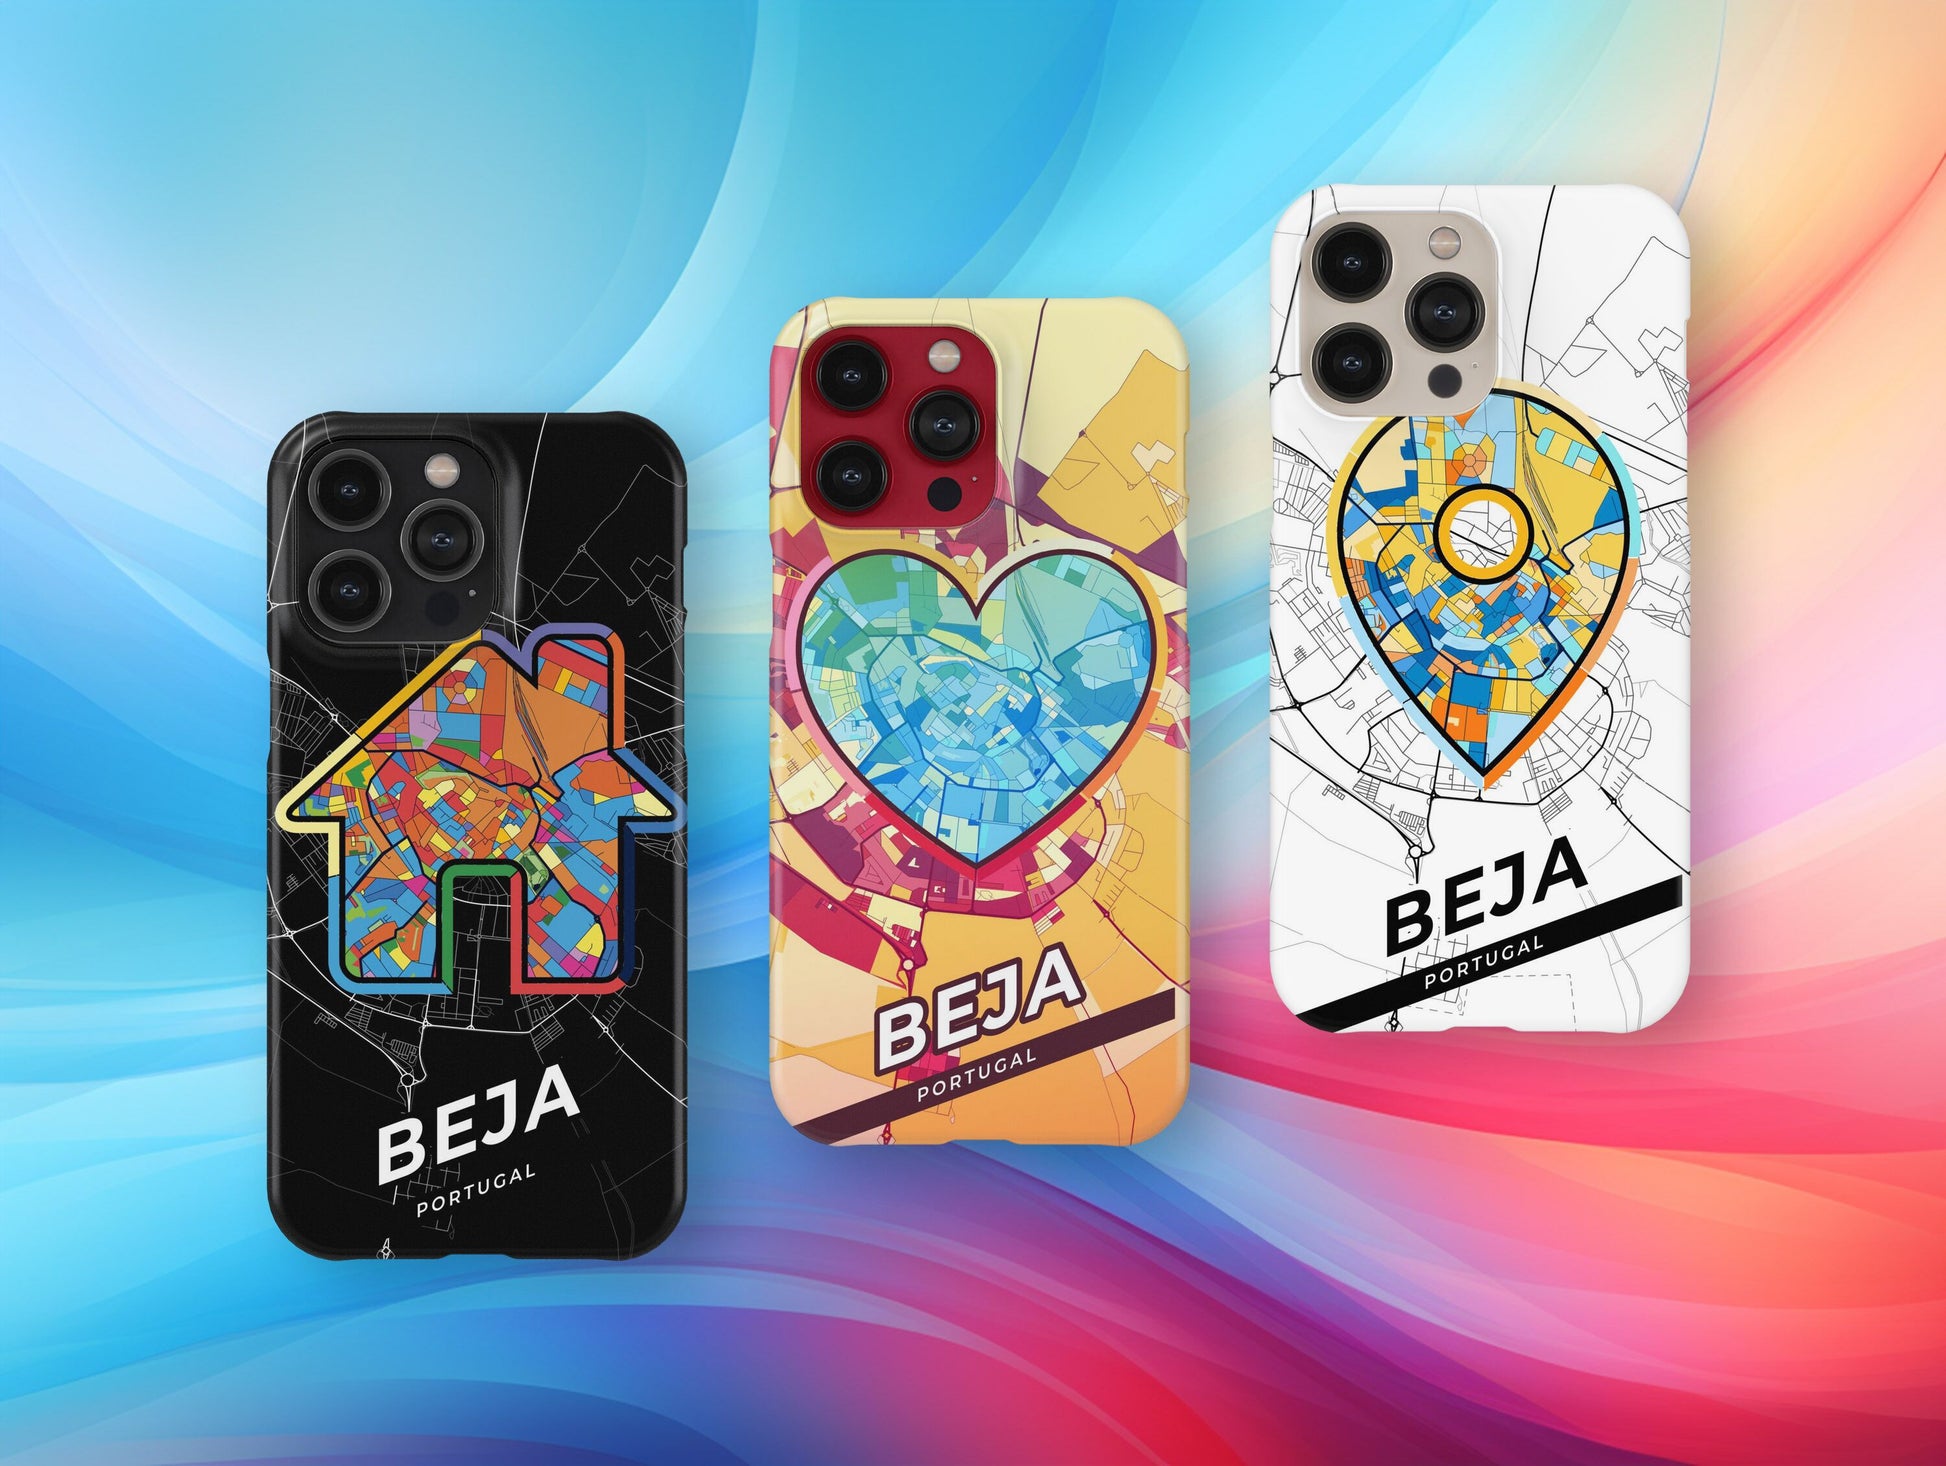 Beja Portugal slim phone case with colorful icon. Birthday, wedding or housewarming gift. Couple match cases.